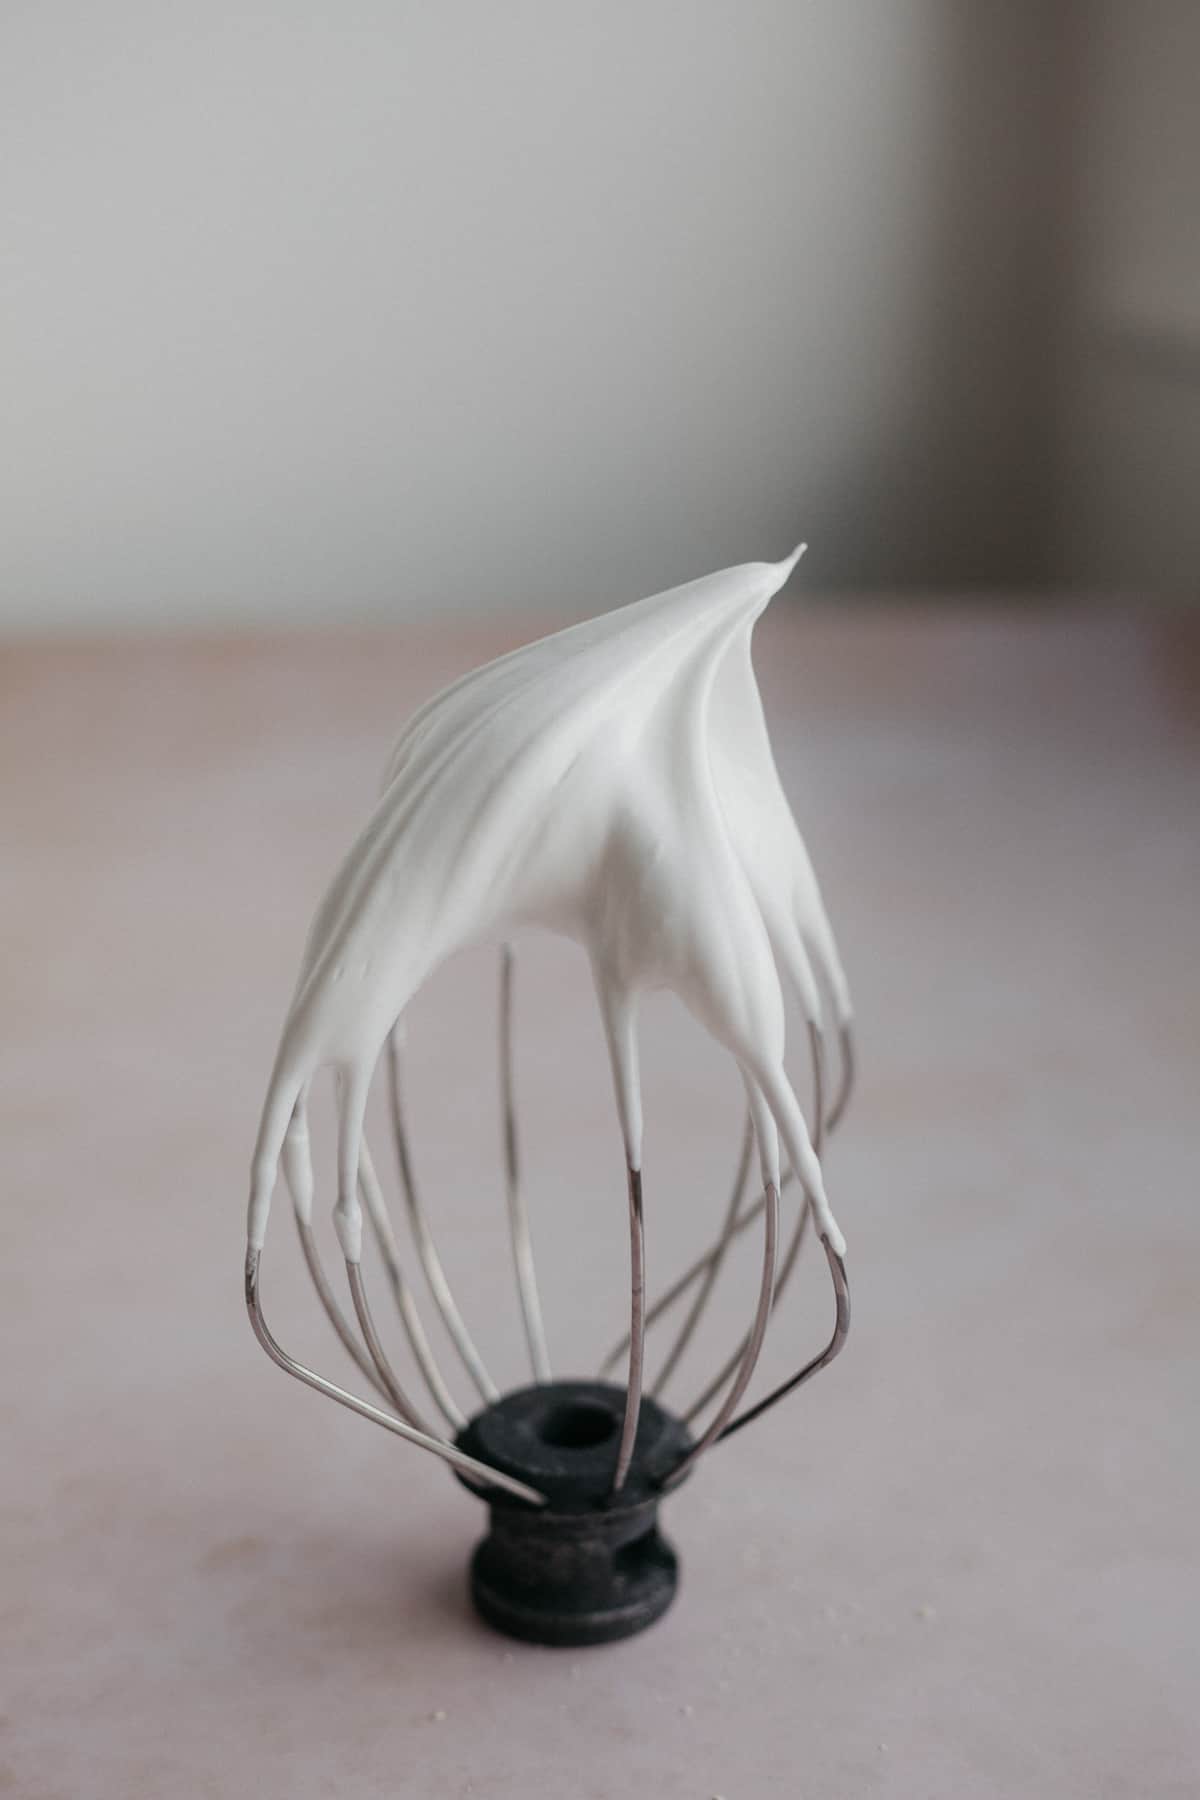 A whisk attachment with white mergingue at the top.